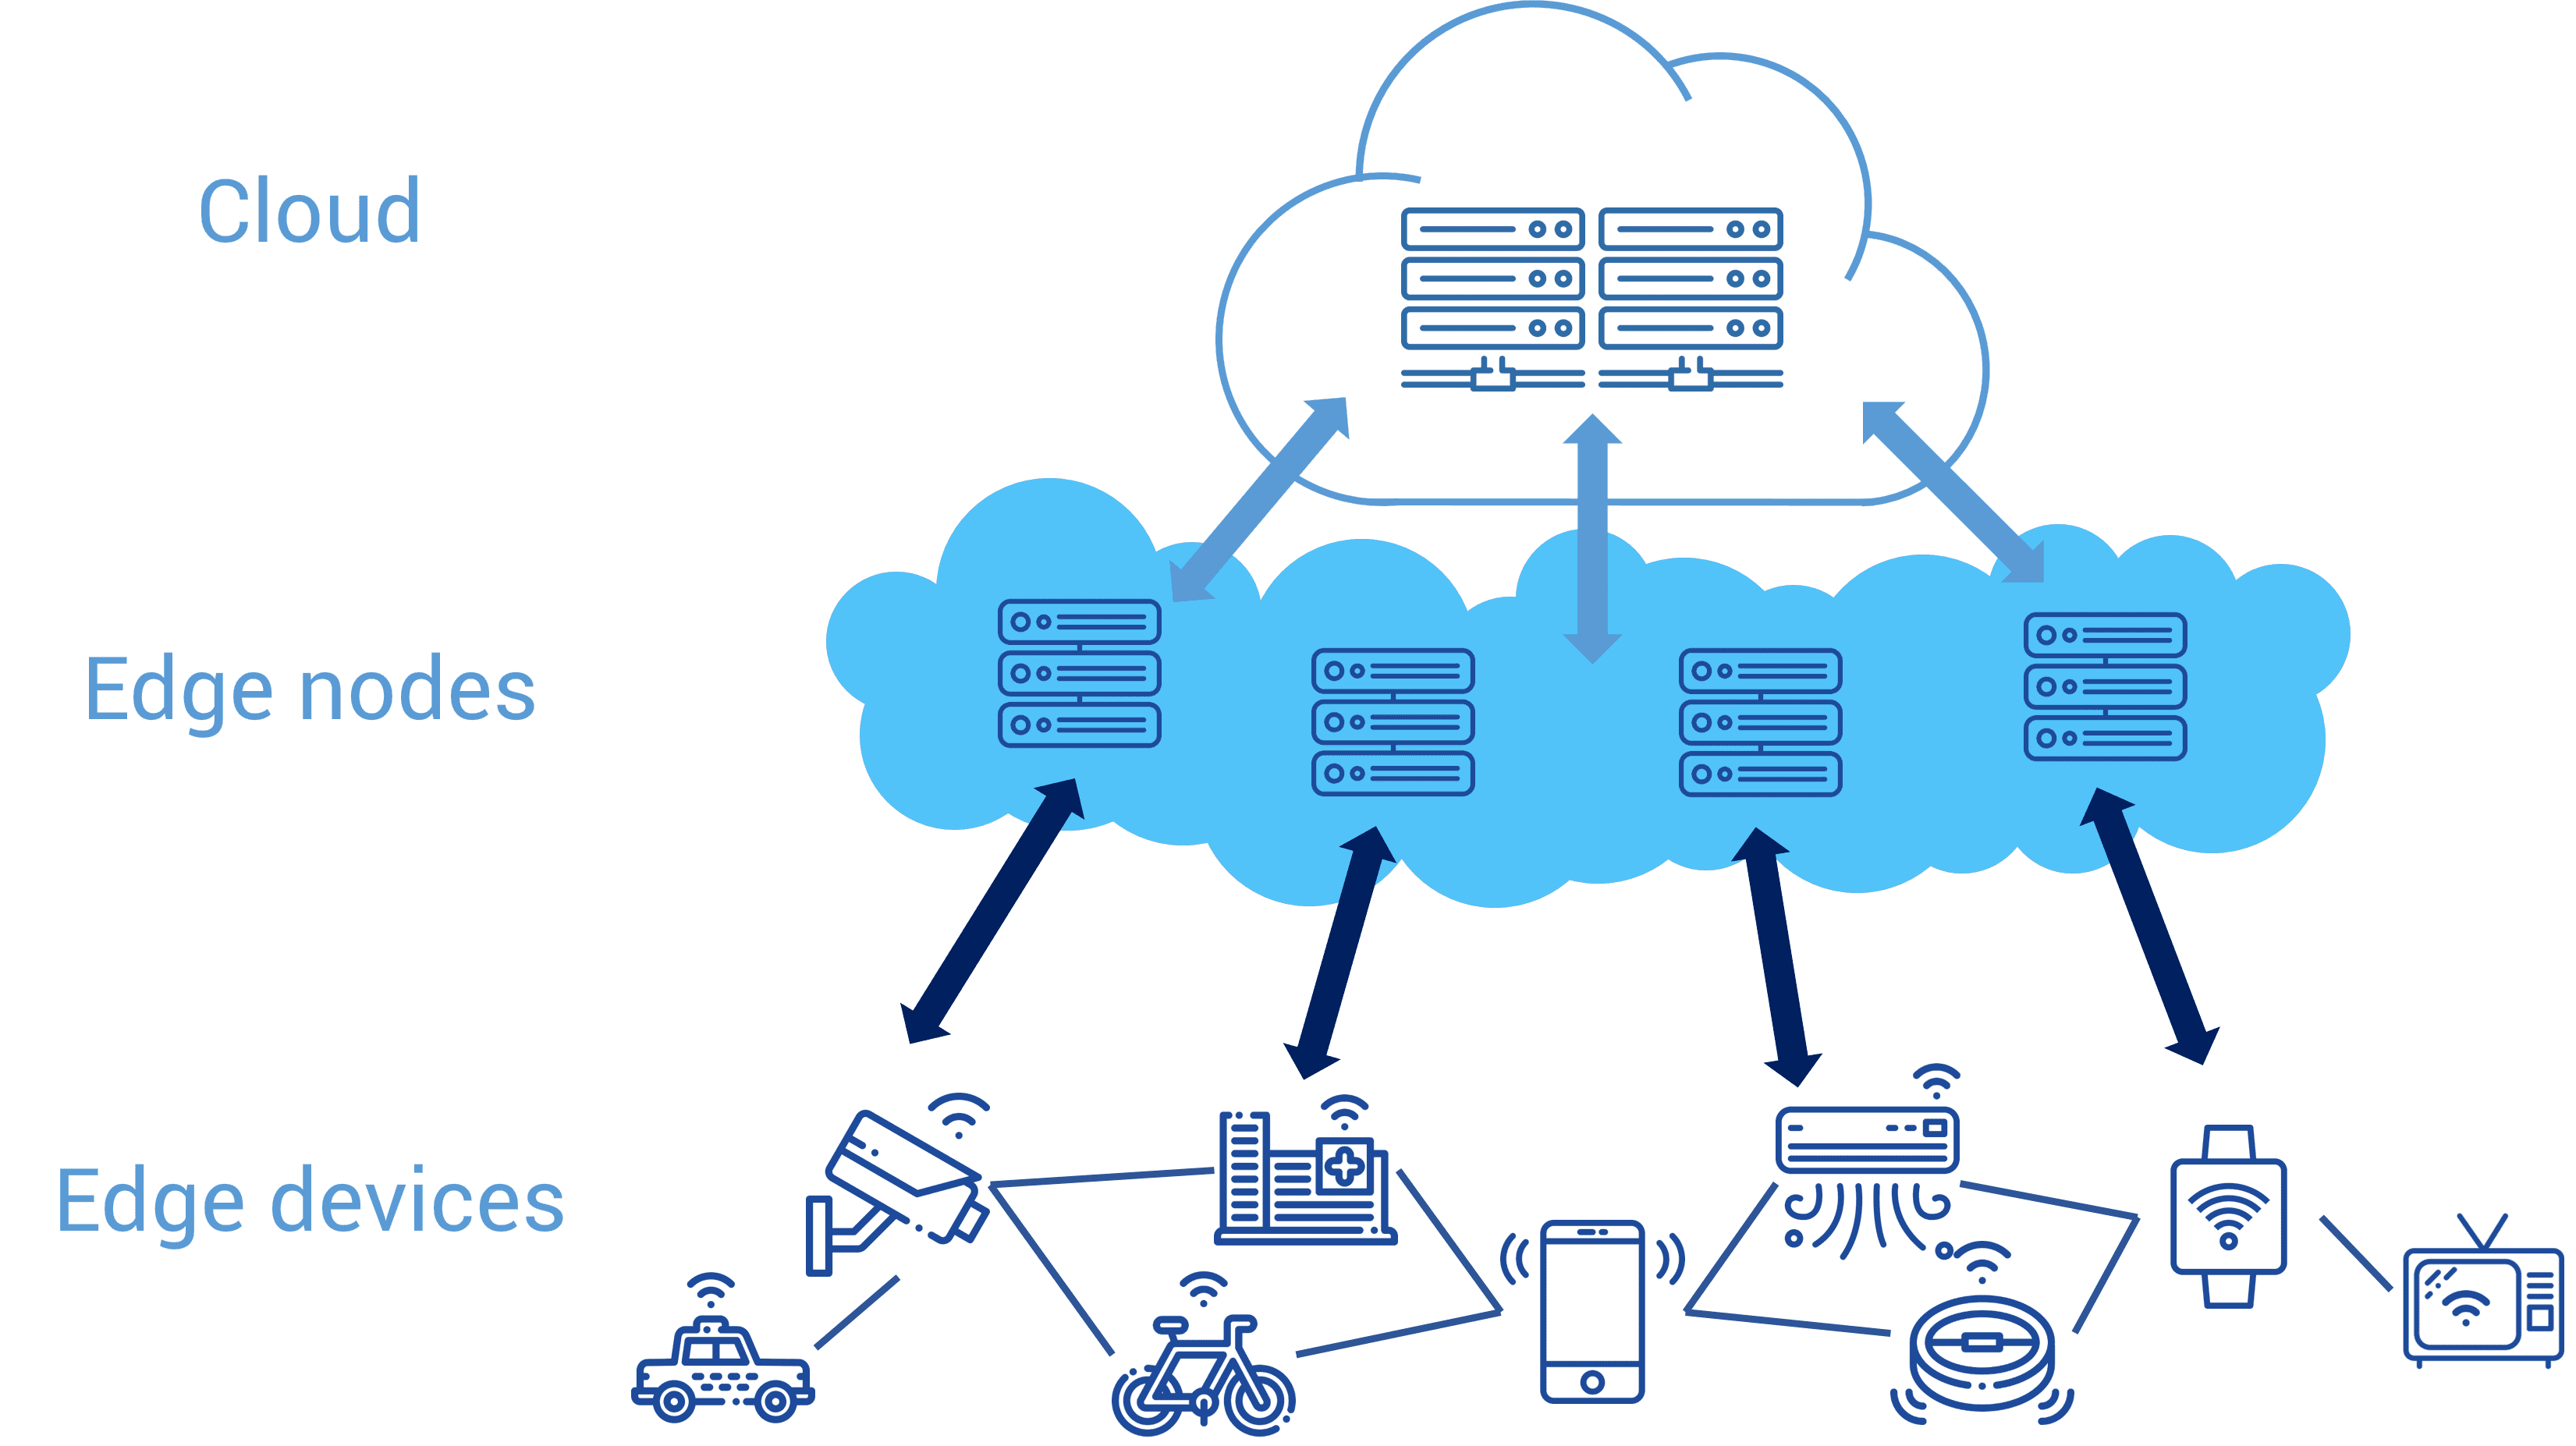 A diagram of a cloud service edge computing network shows how edge devices connect to edge nodes, which in turn connect to the cloud.